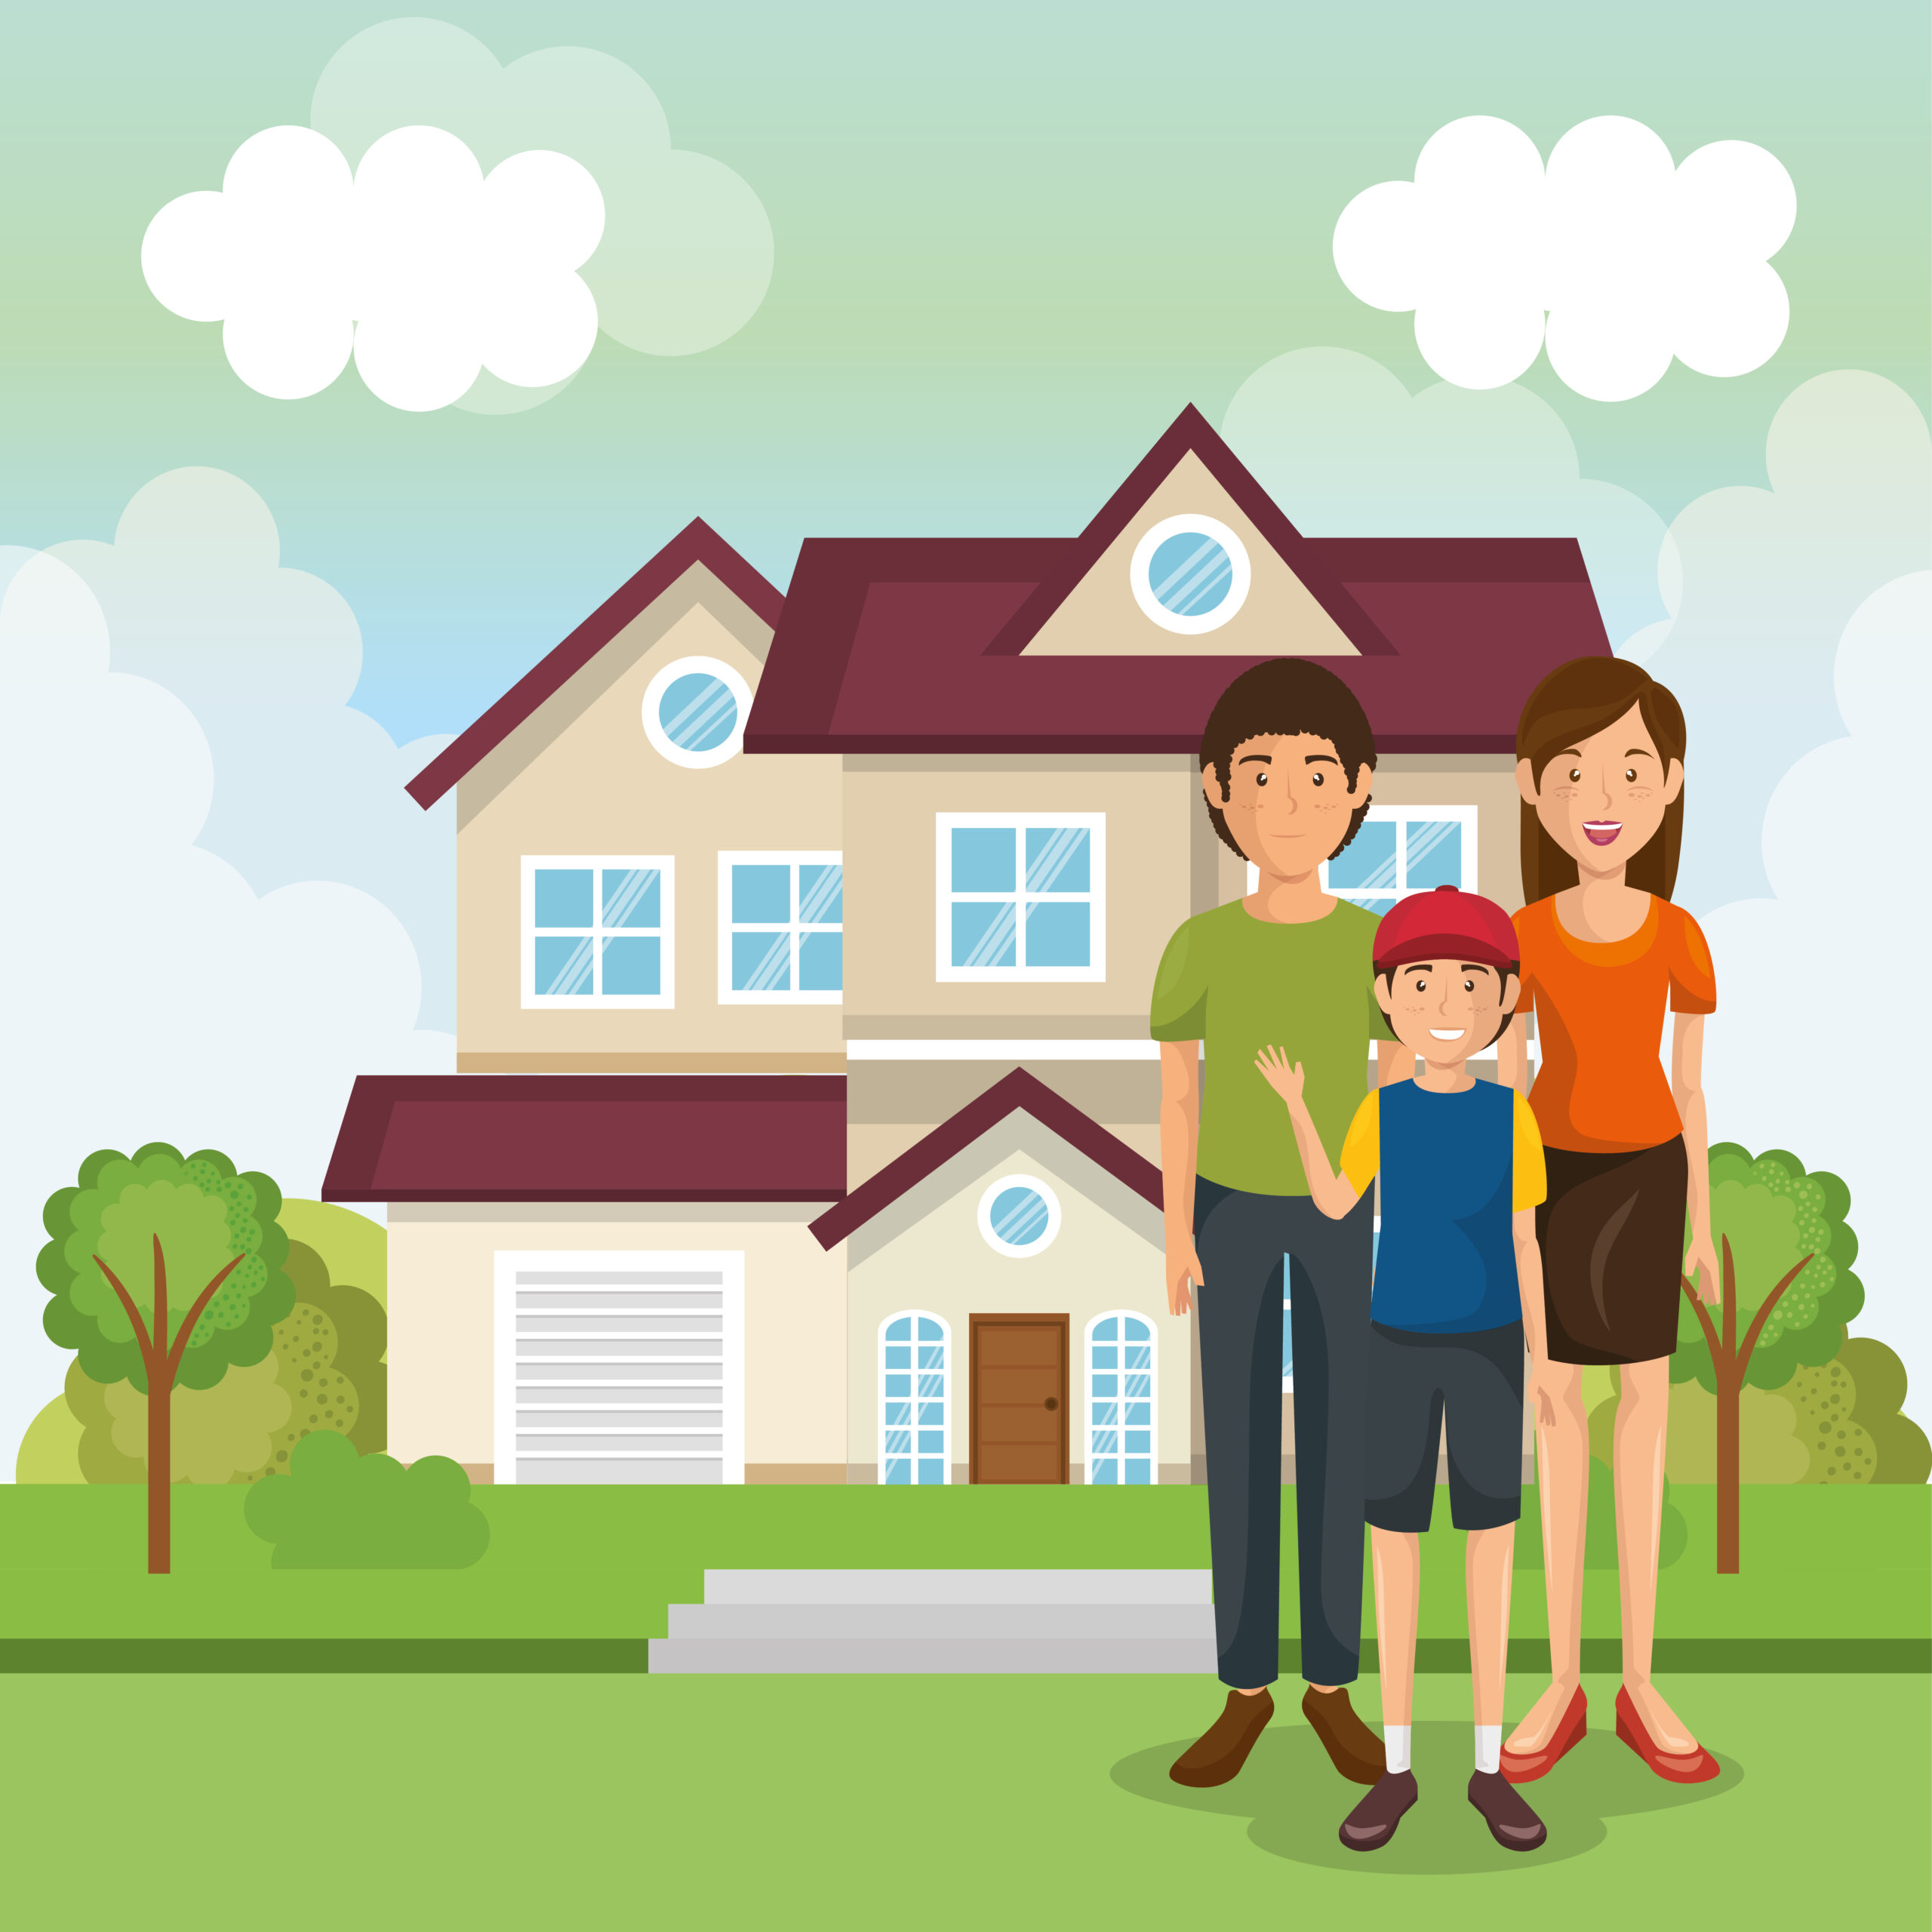 The budget and downsizing the family home